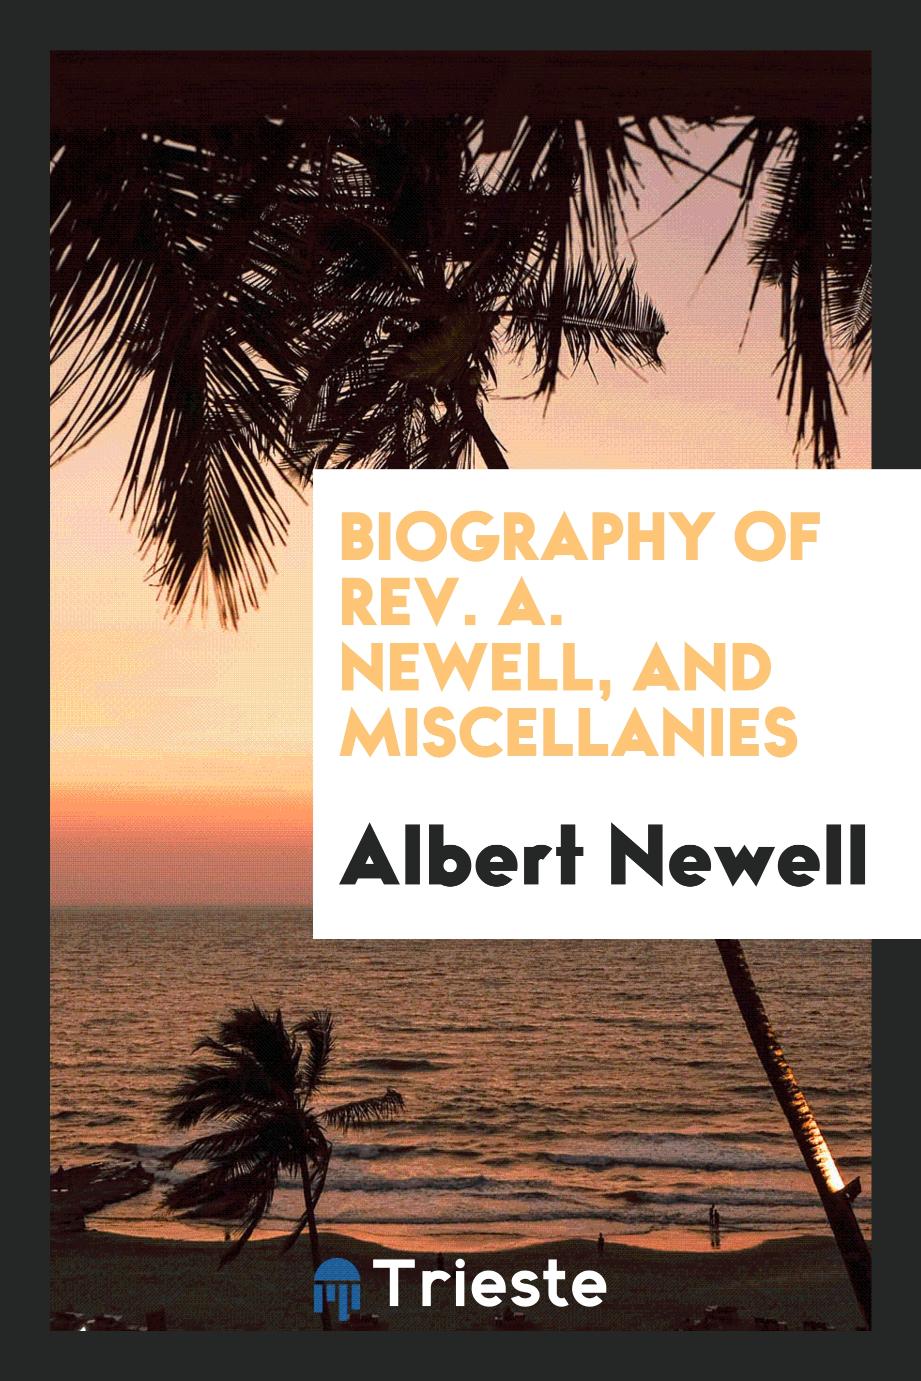 Biography of Rev. A. Newell, and miscellanies